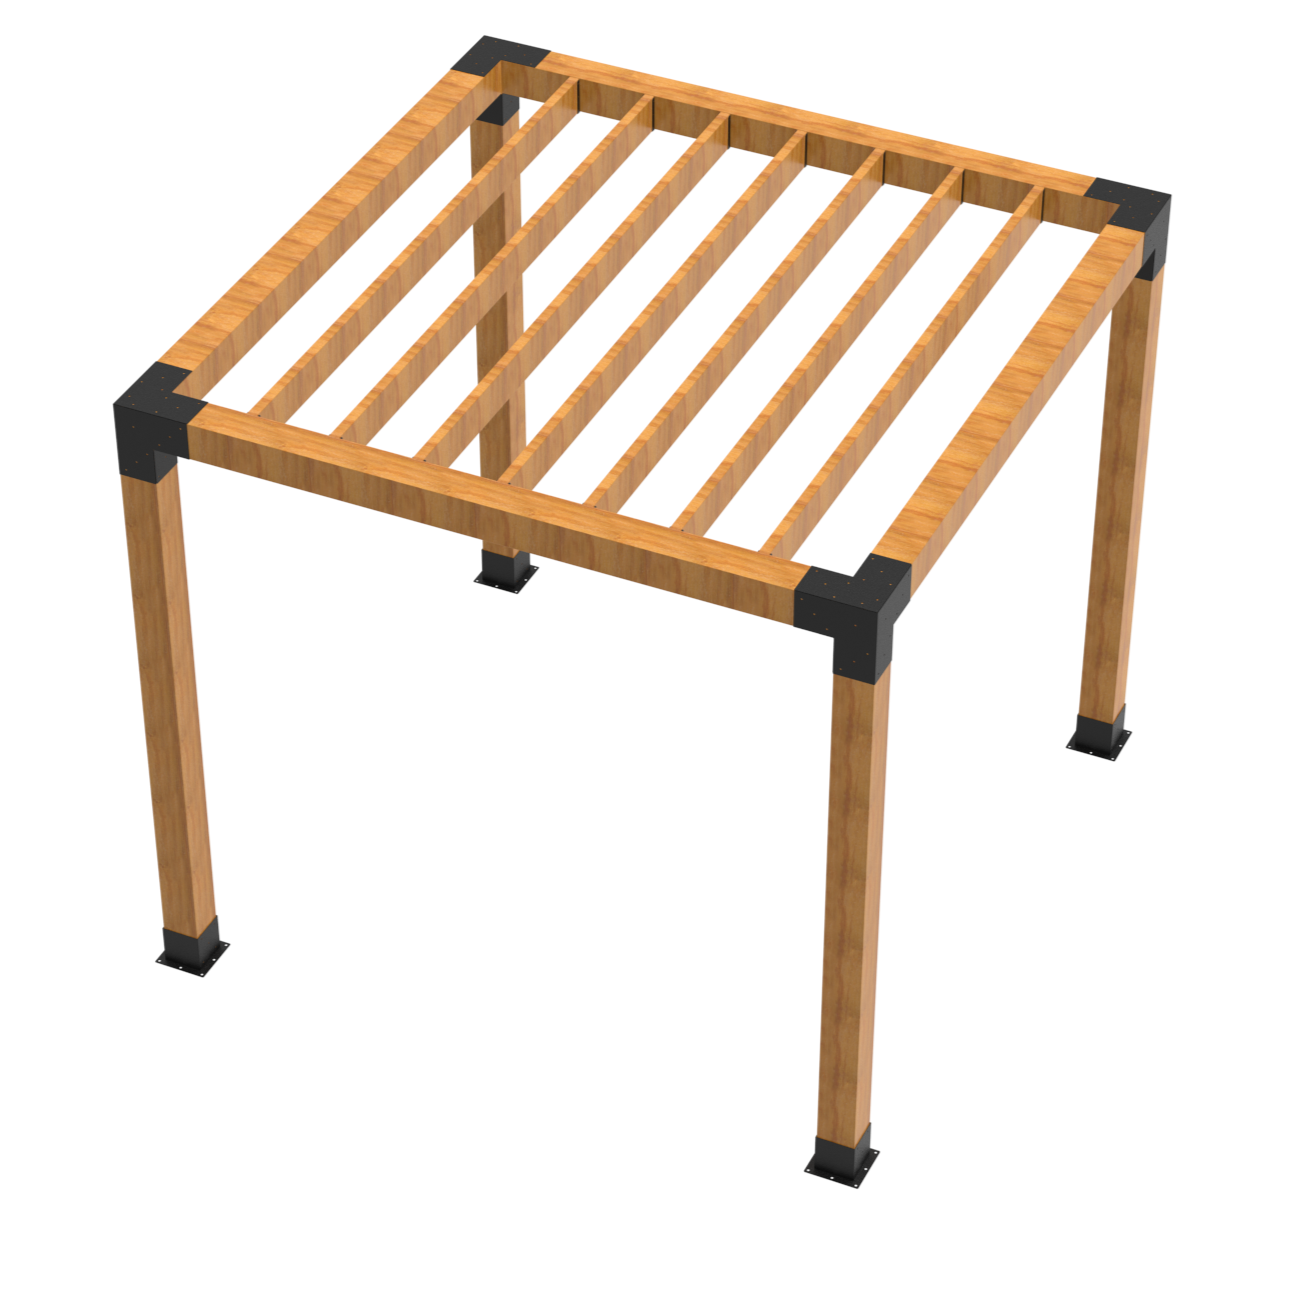 Pergola Kit with Rafter Brackets for 6"X6" Wood Posts